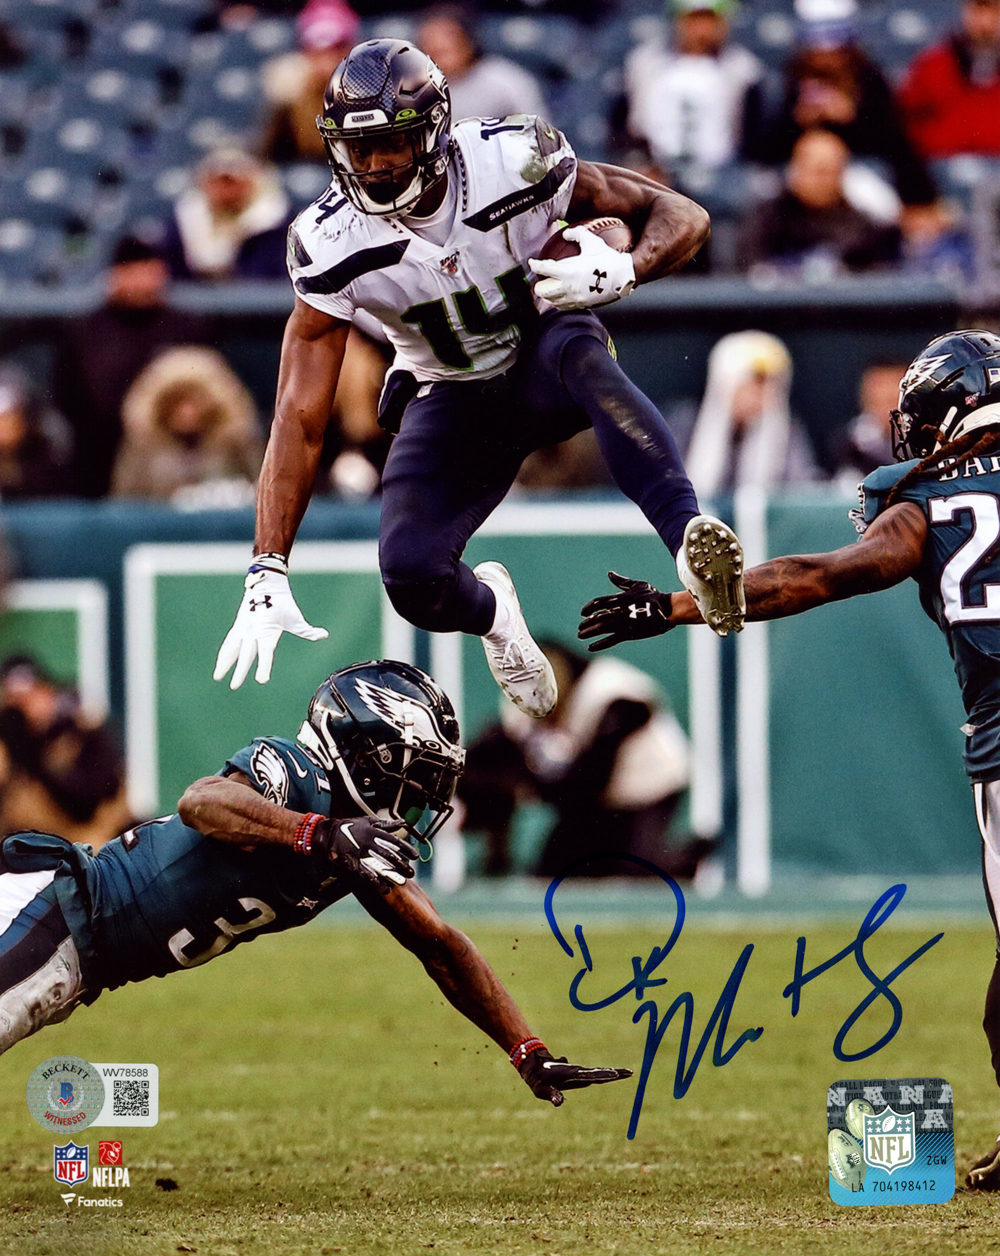 DK Metcalf Autographed/Signed Seattle Seahawks 8x10 Photo Beckett